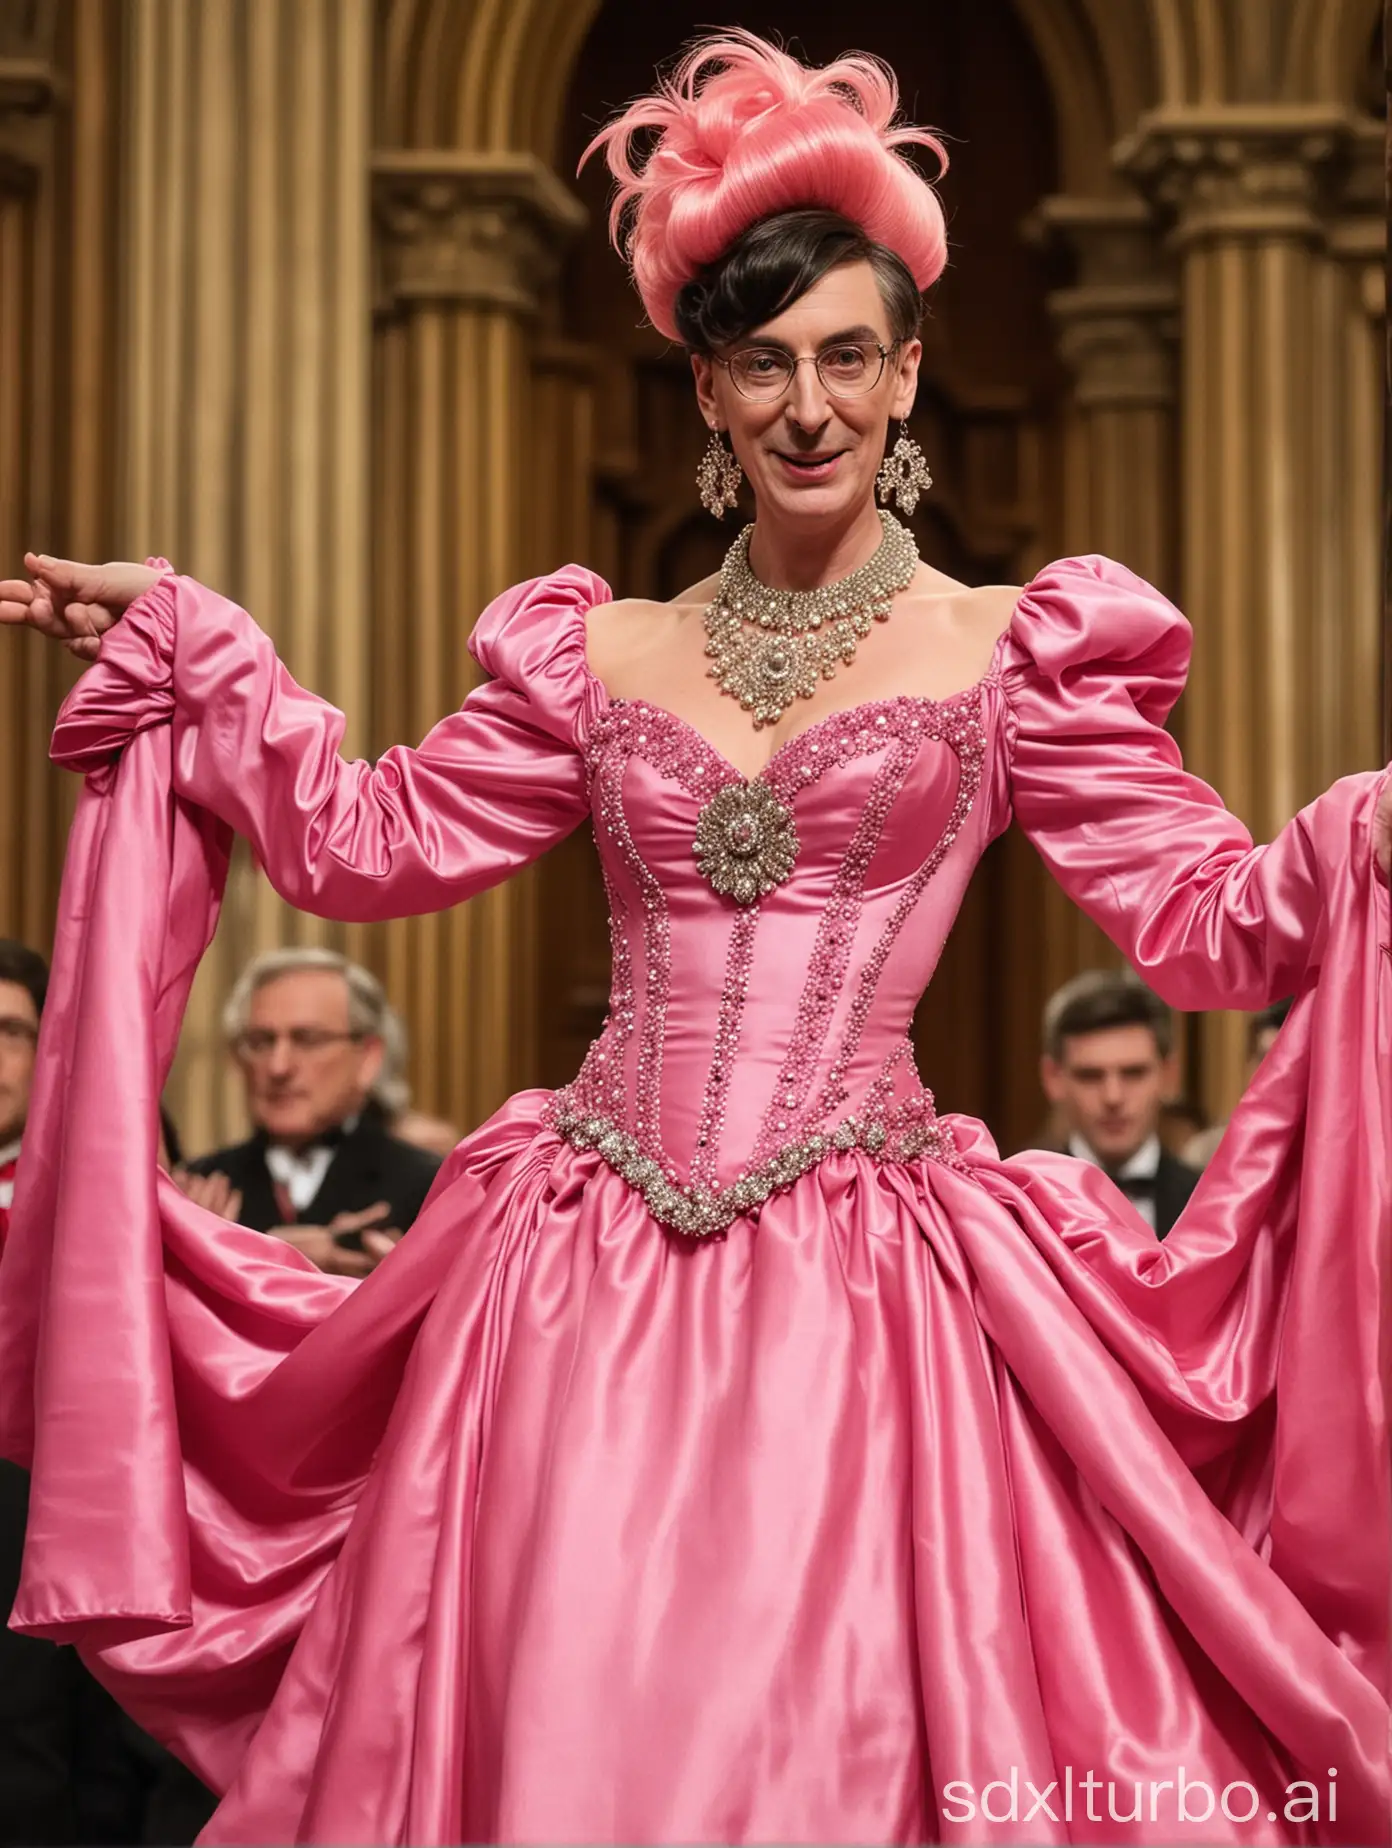 British politician Jacob Rees-Mogg as a flamboyant drag queen posing on the stage of parliament In front of a crowd, pink satin ballroom gown